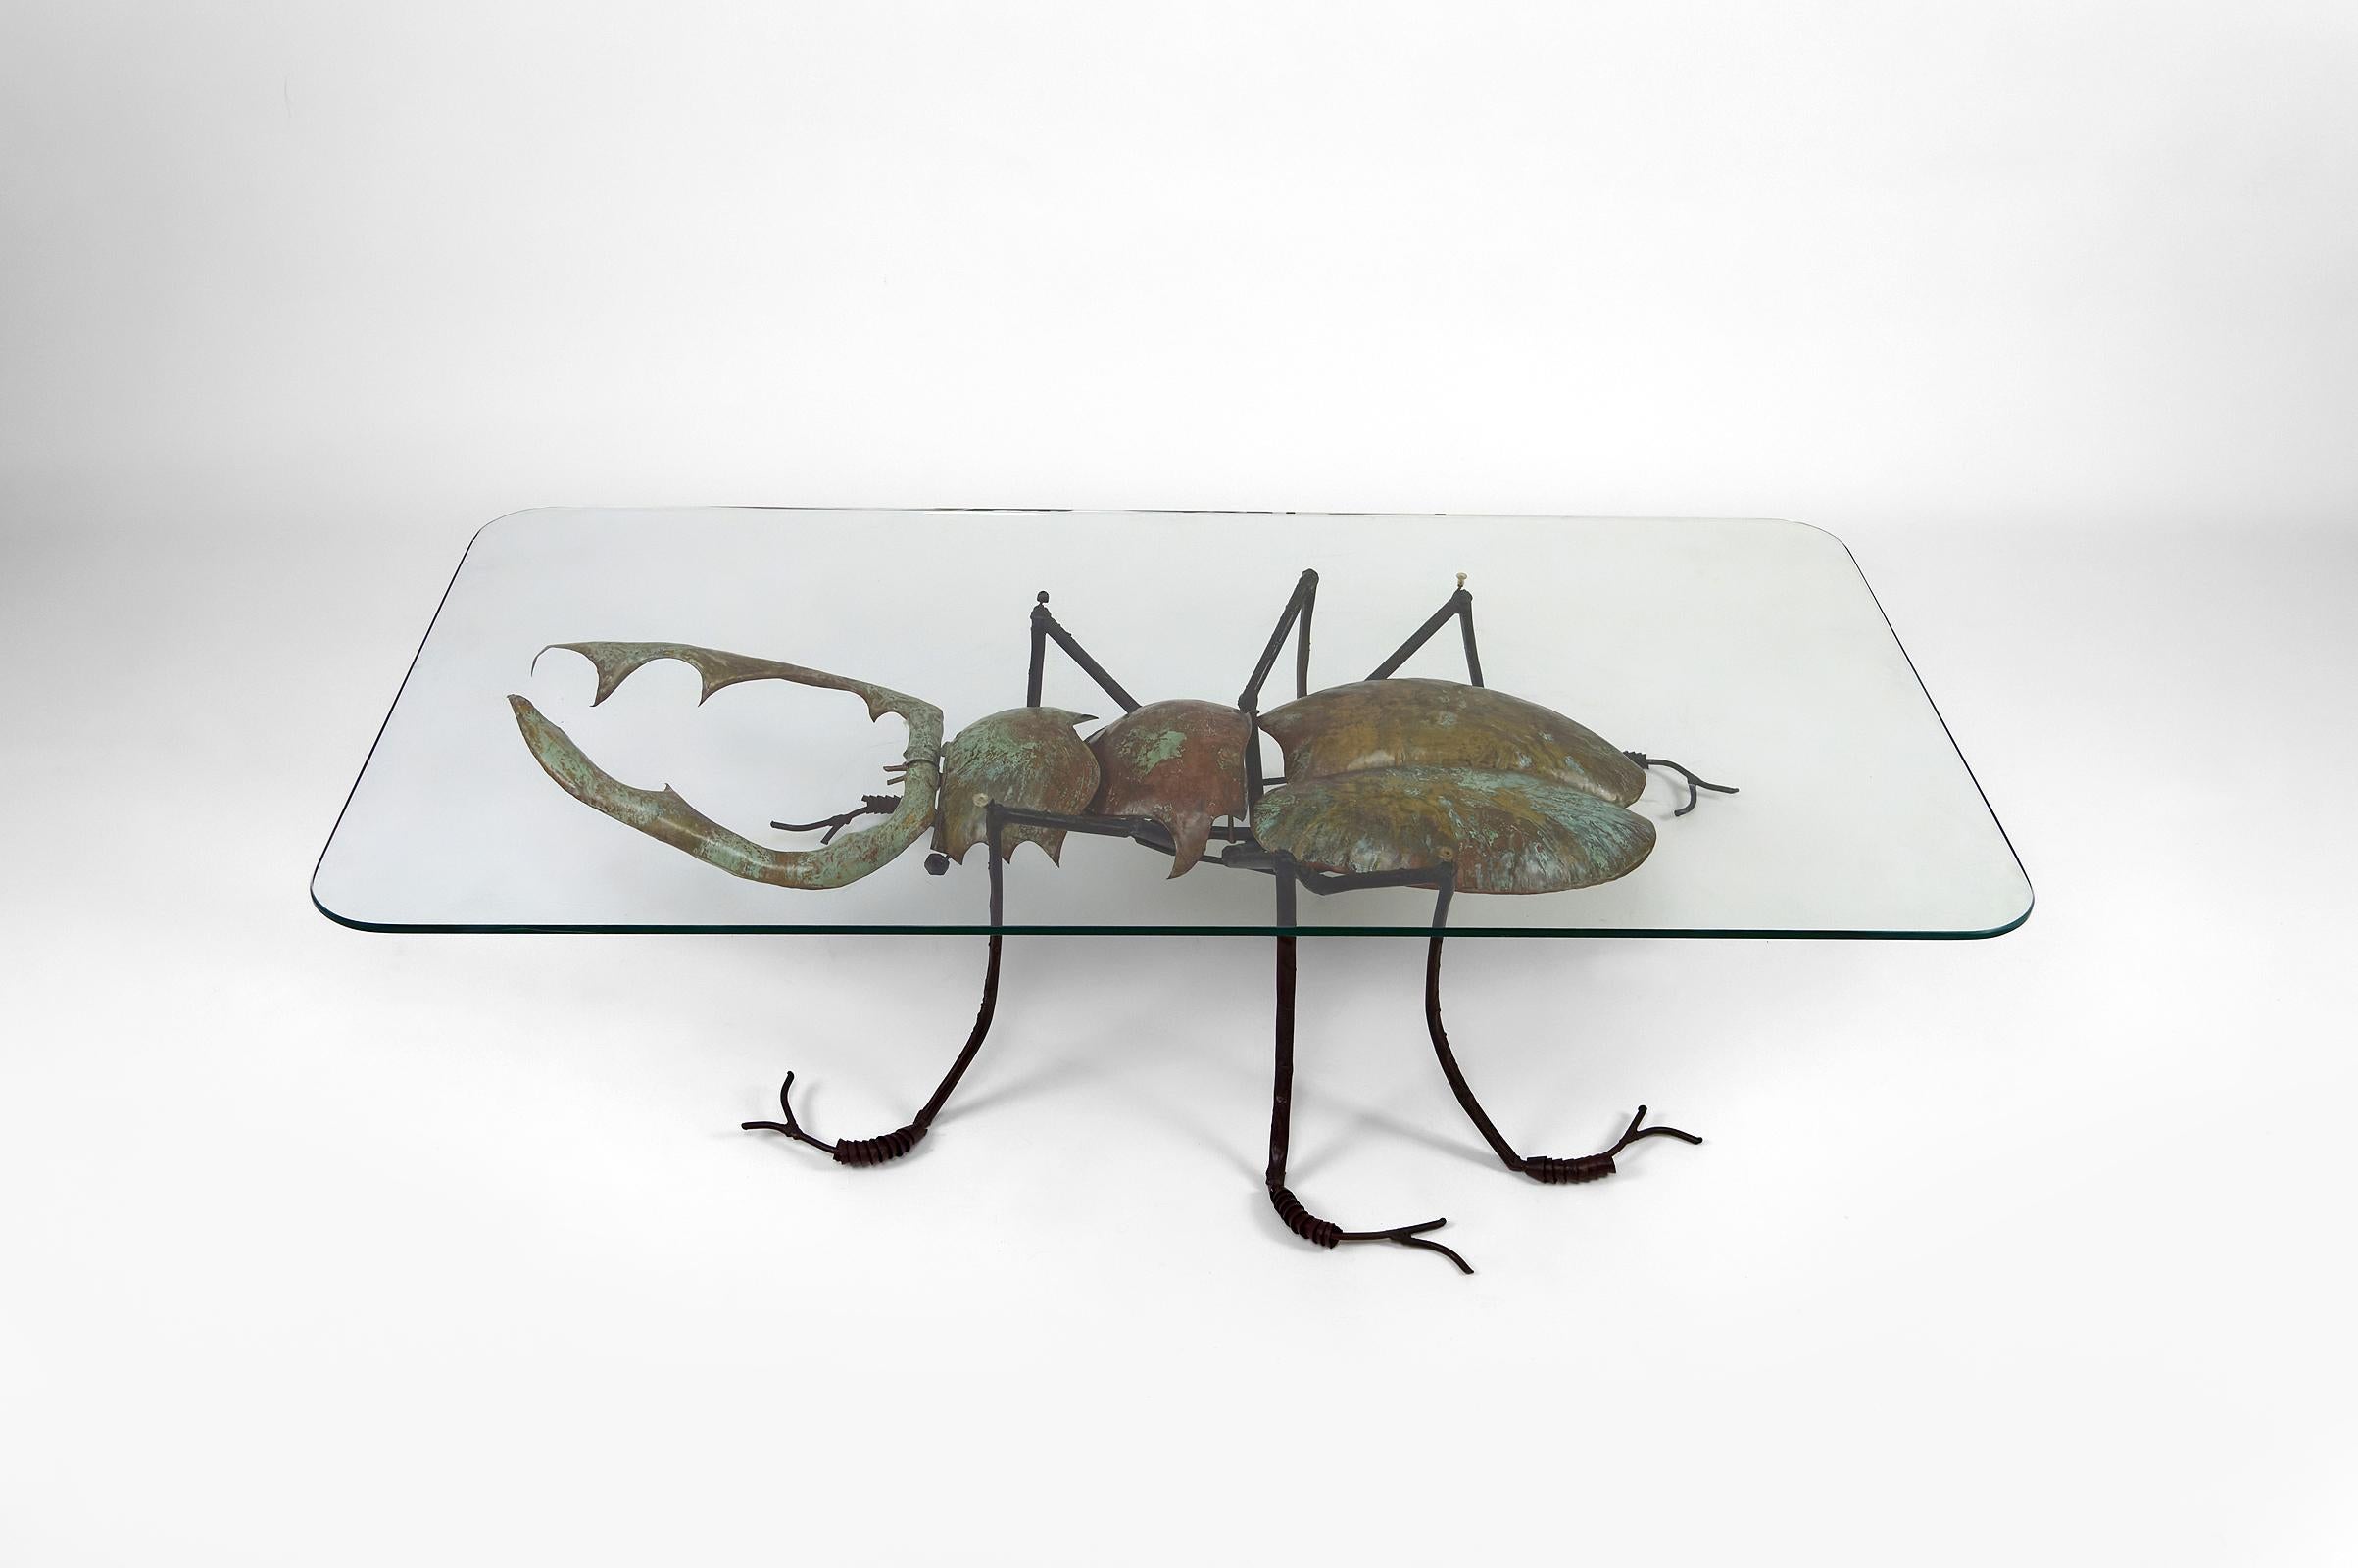 Superb coffee table composed of a metal sculpture and a glass top.

The metal sculpture represents a stag beetle / scarab in wrought iron, patinated brass and other various metals. The insect is covered in a verdigris / rust patina.
The top is a